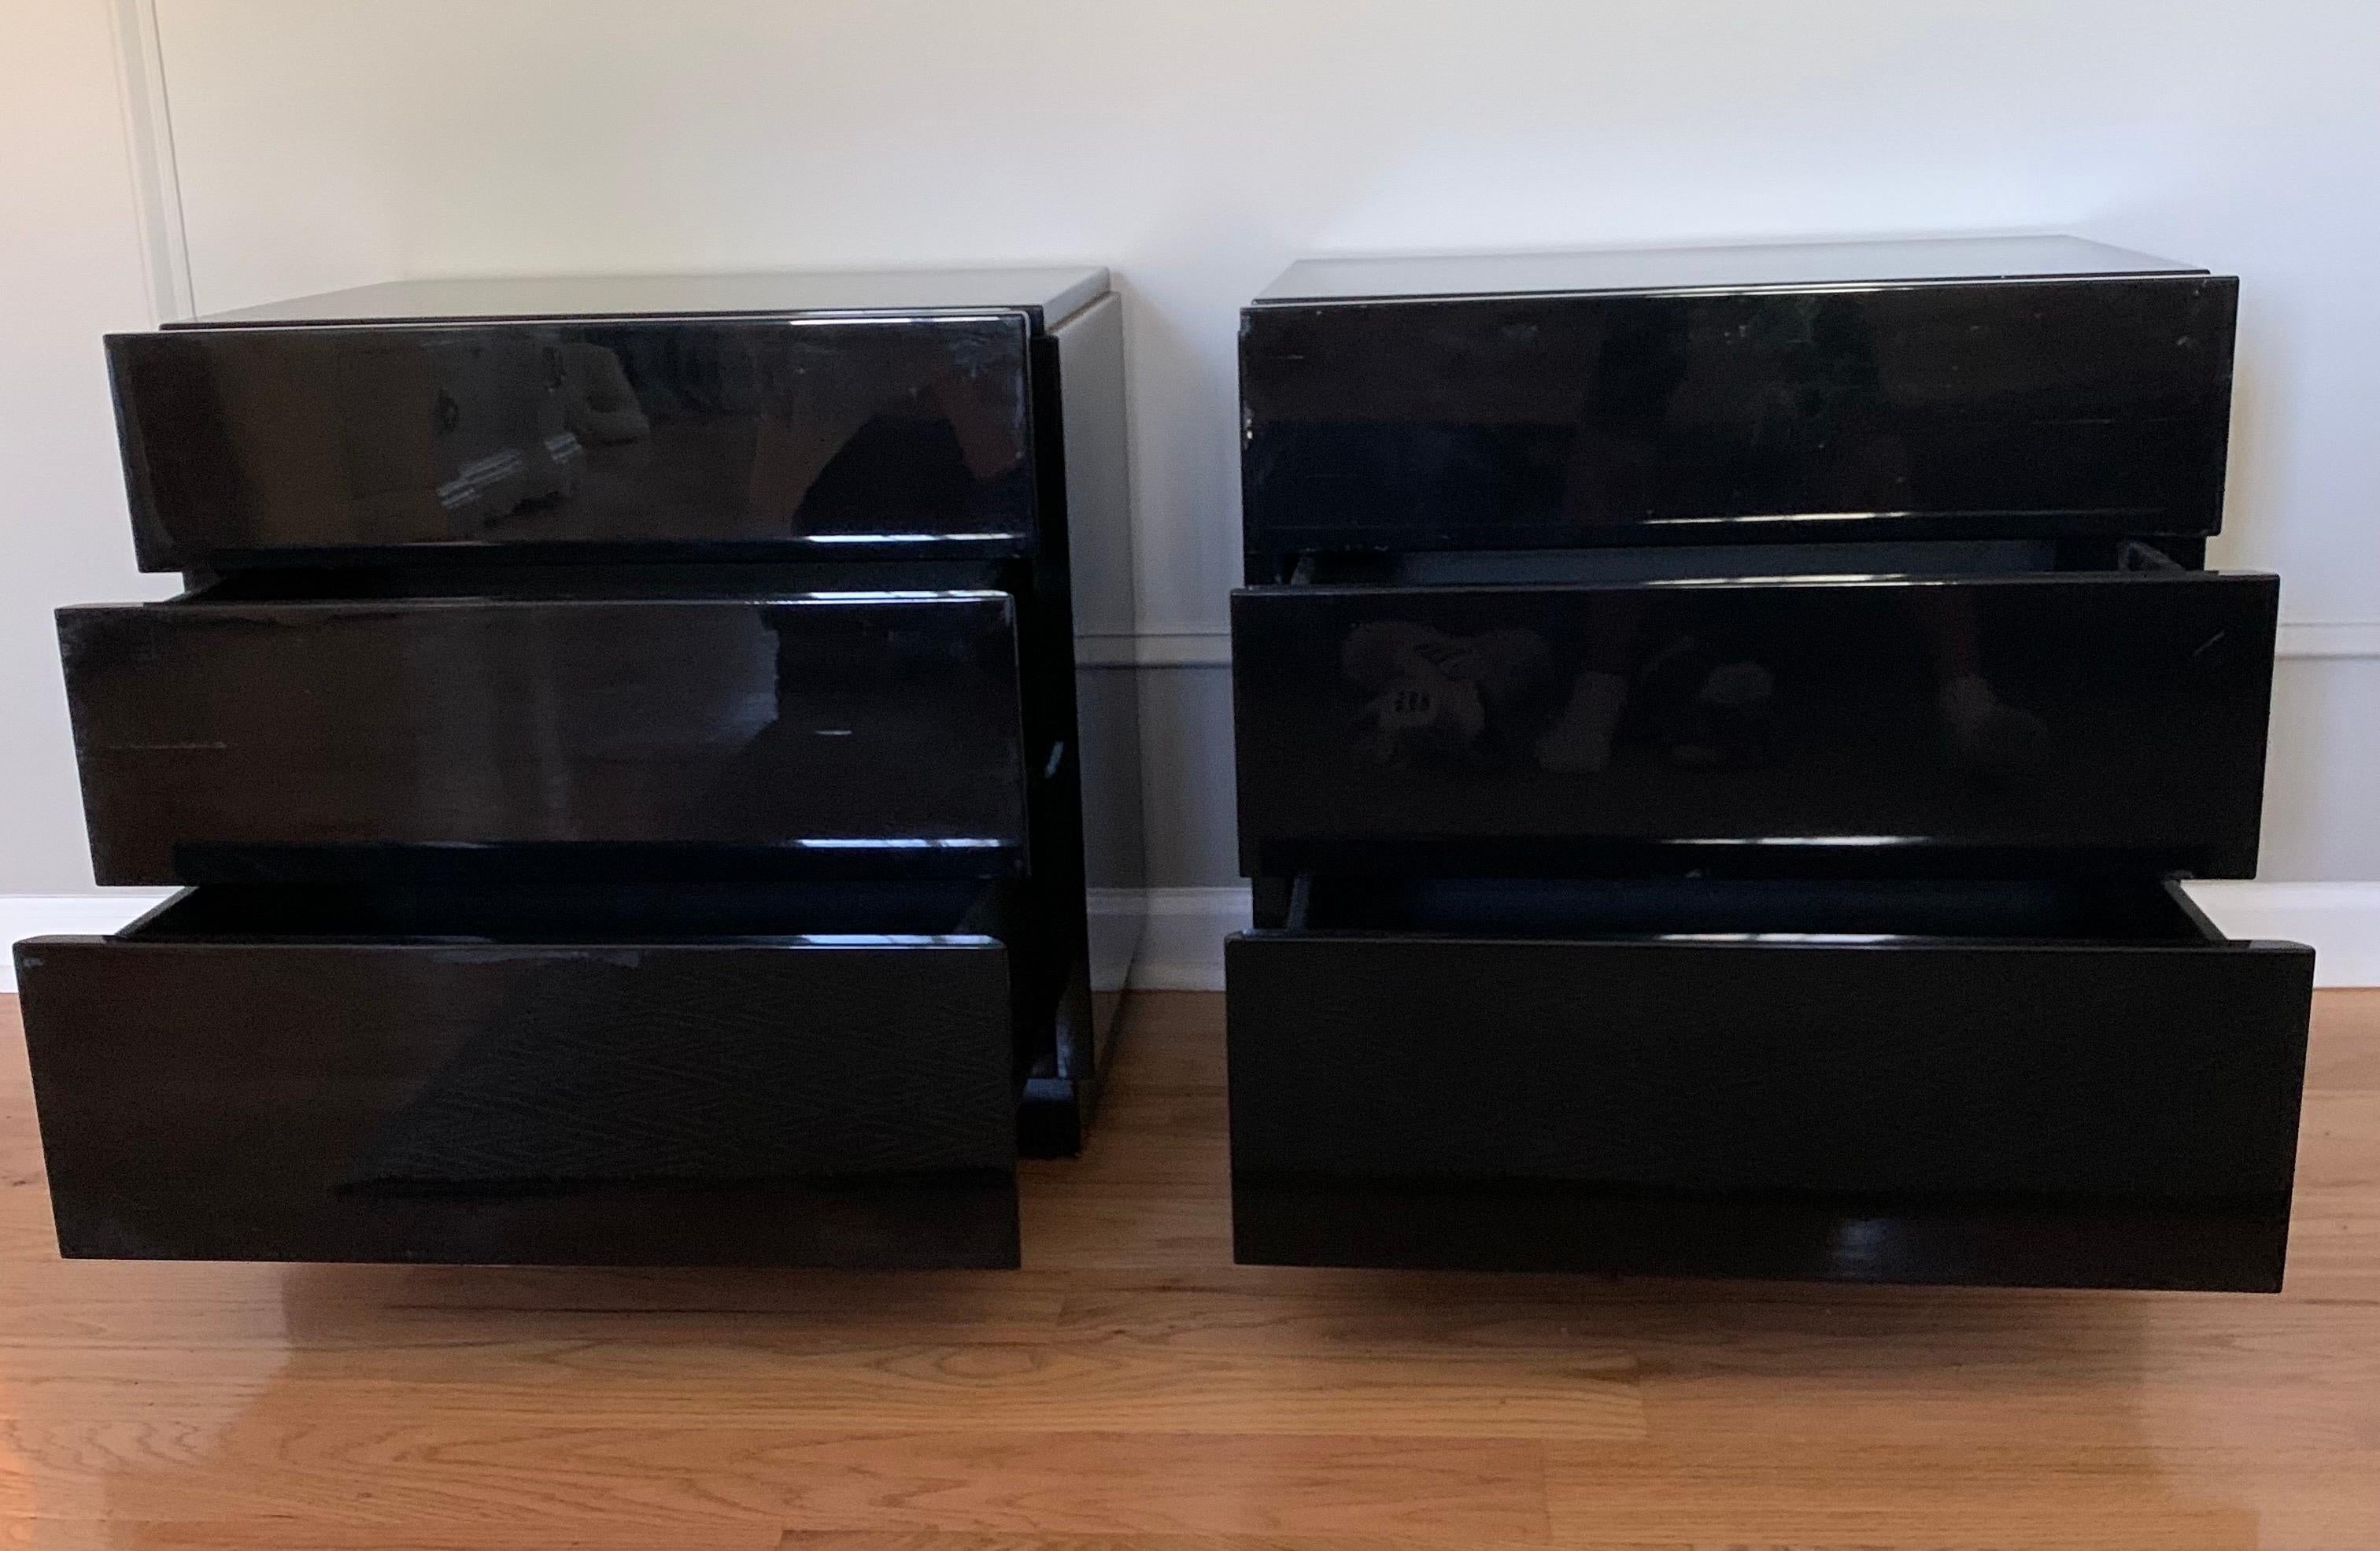 Post modern pair of high gloss lacquered 3 drawer nightstands by Bridgeford, a division of Henredon. Minimalistic design. In nice vintage condition. Sturdy with beautiful craftsmanship. Drawers are clean and operate smoothly.